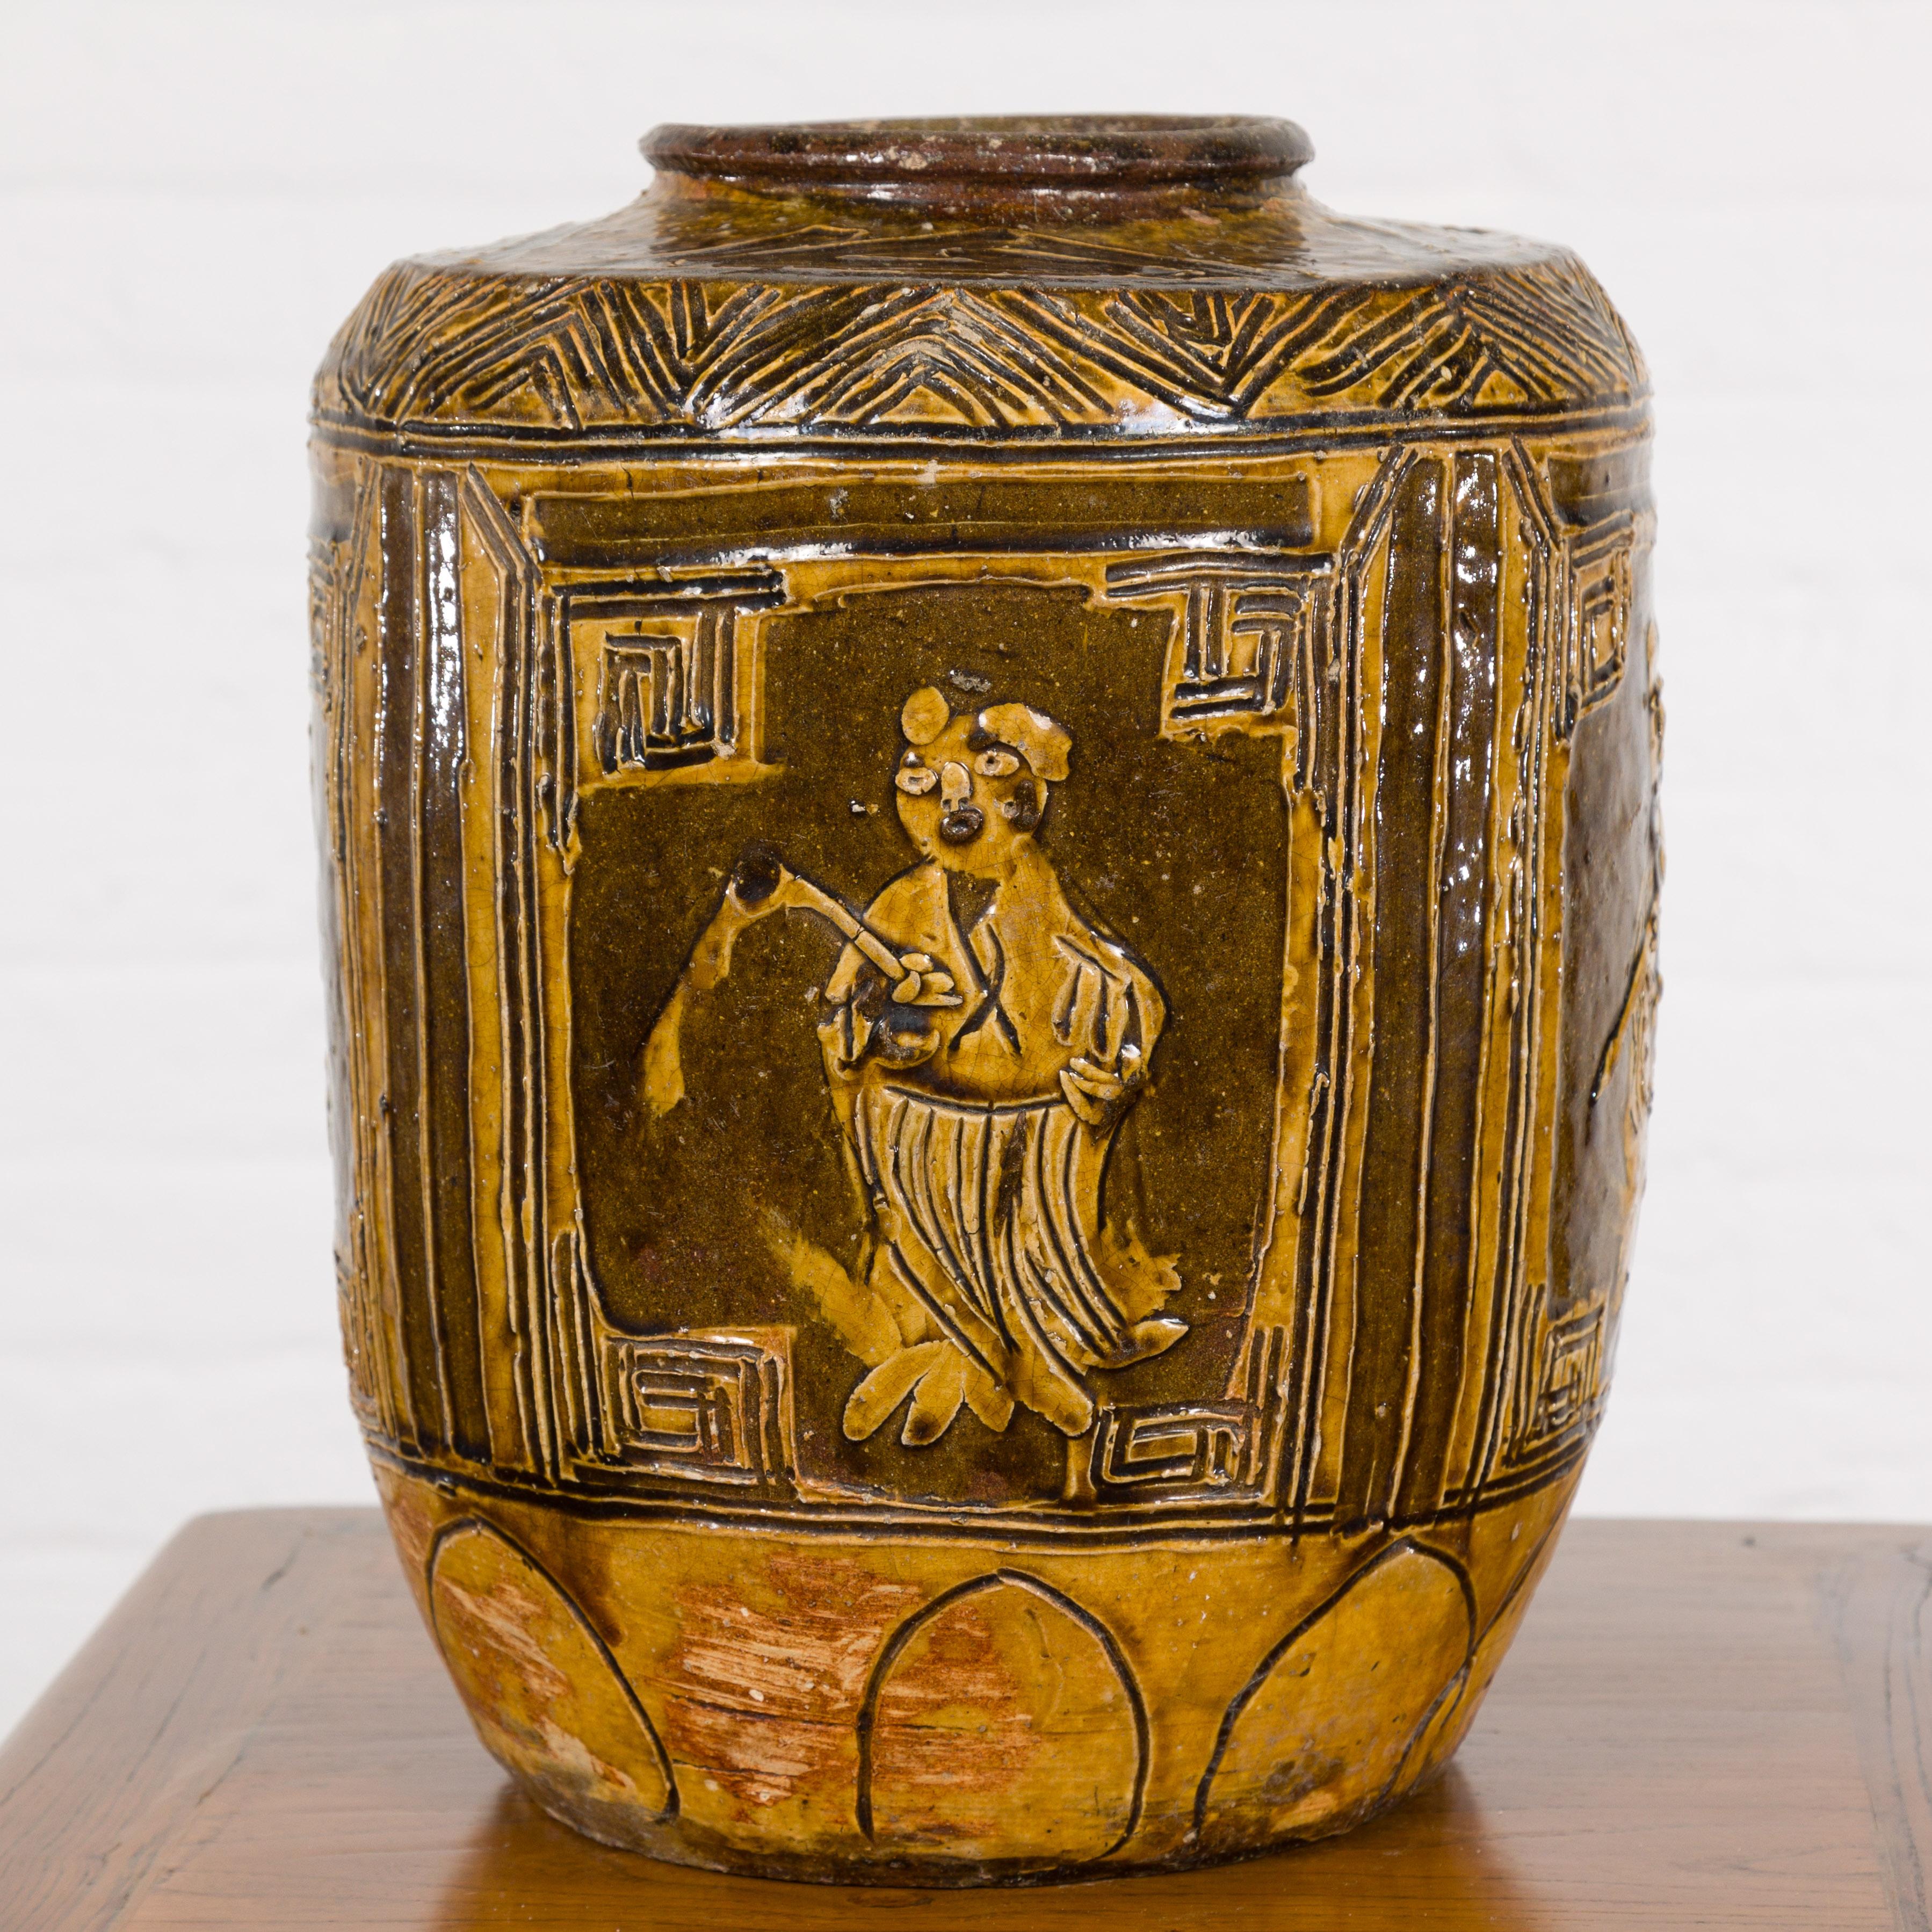 Two-Toned Brown Vase with Archaic Style Figures and Calligraphy Motifs In Good Condition For Sale In Yonkers, NY